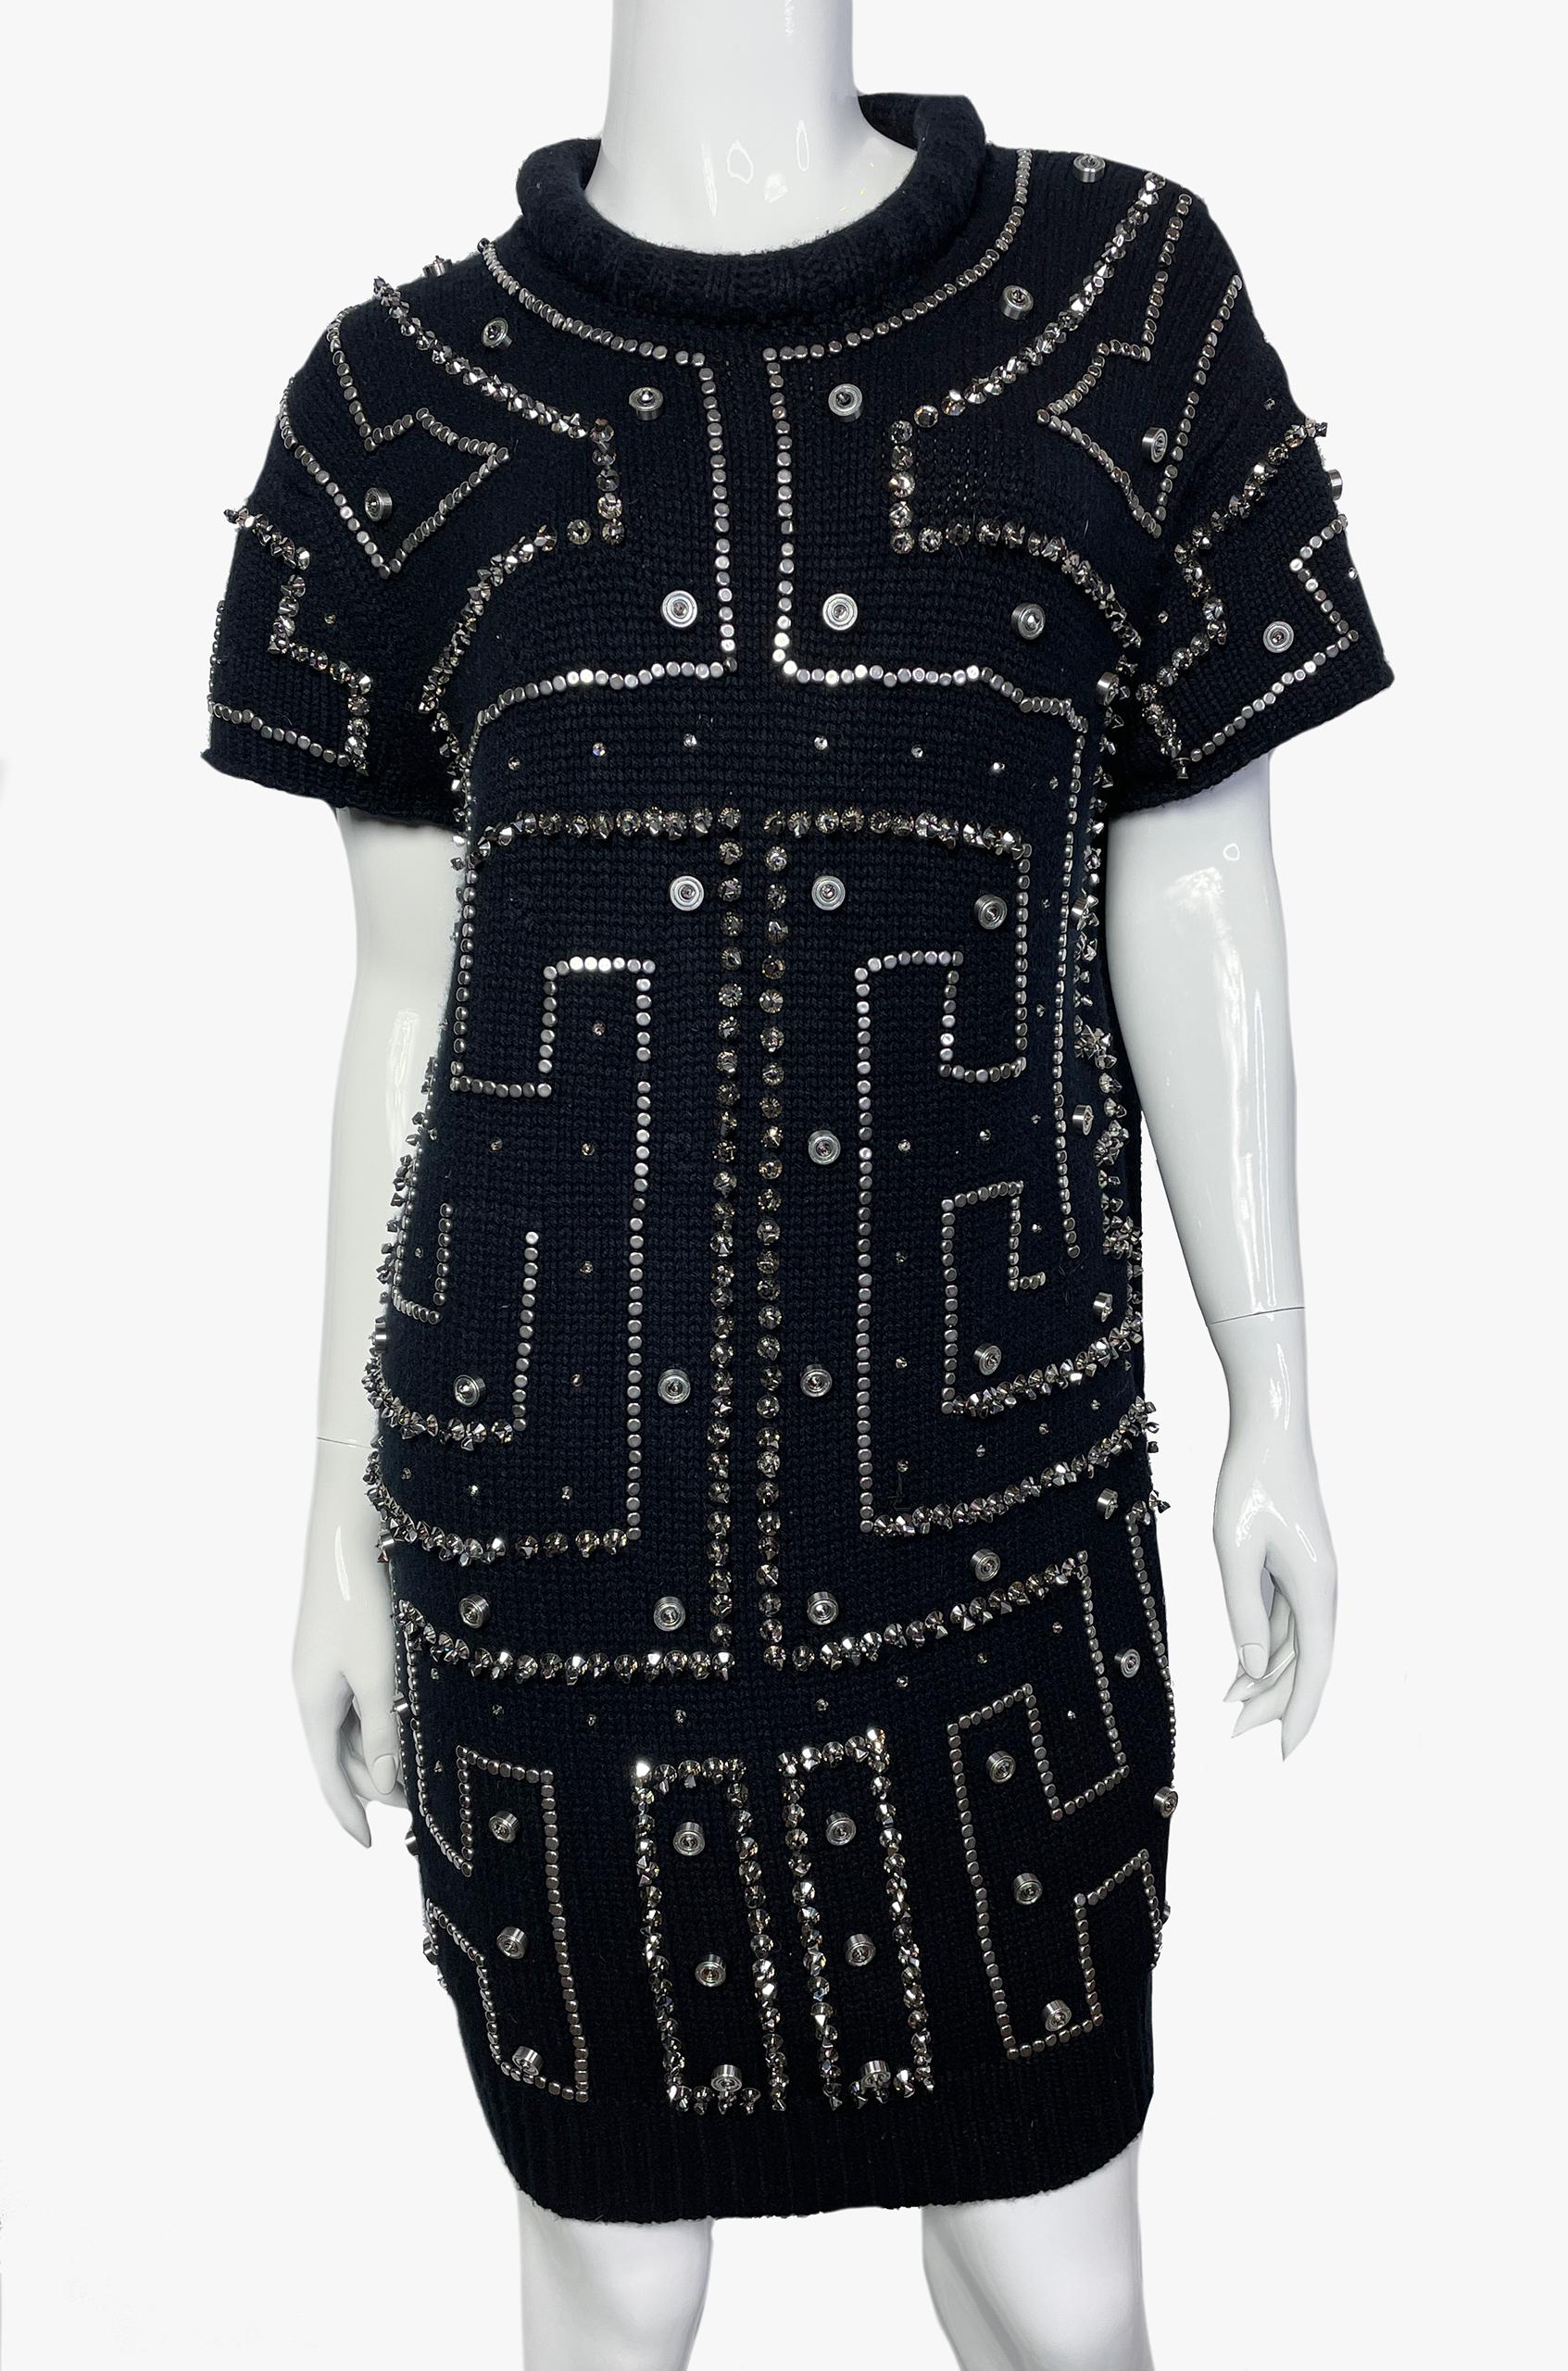 Halston cashmere knitted dress with decor made of metal elements.

Additional information:
Fabric: 100% cashmere
Size: XS-S
Period: 2000s
Condition: Very good
........Additional information ........

- Photo might be slightly different from actual